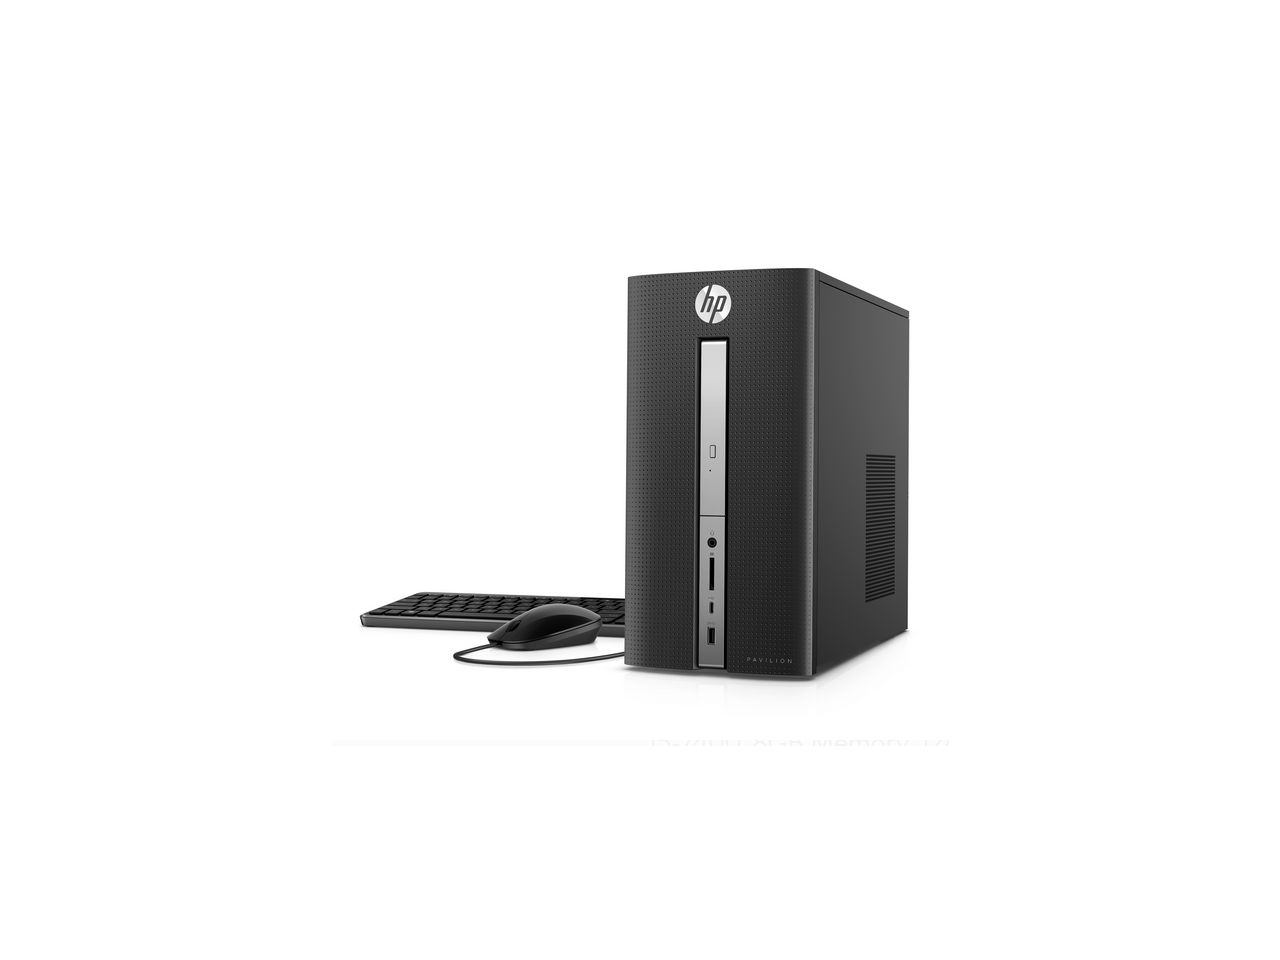 HP Pavilion Power Desktop Tower, Intel Core i5-7400, 8GB DDR4, 128GB SSD + 1TB Hard Drive, Windows 10 with Keyboard and Mouse included